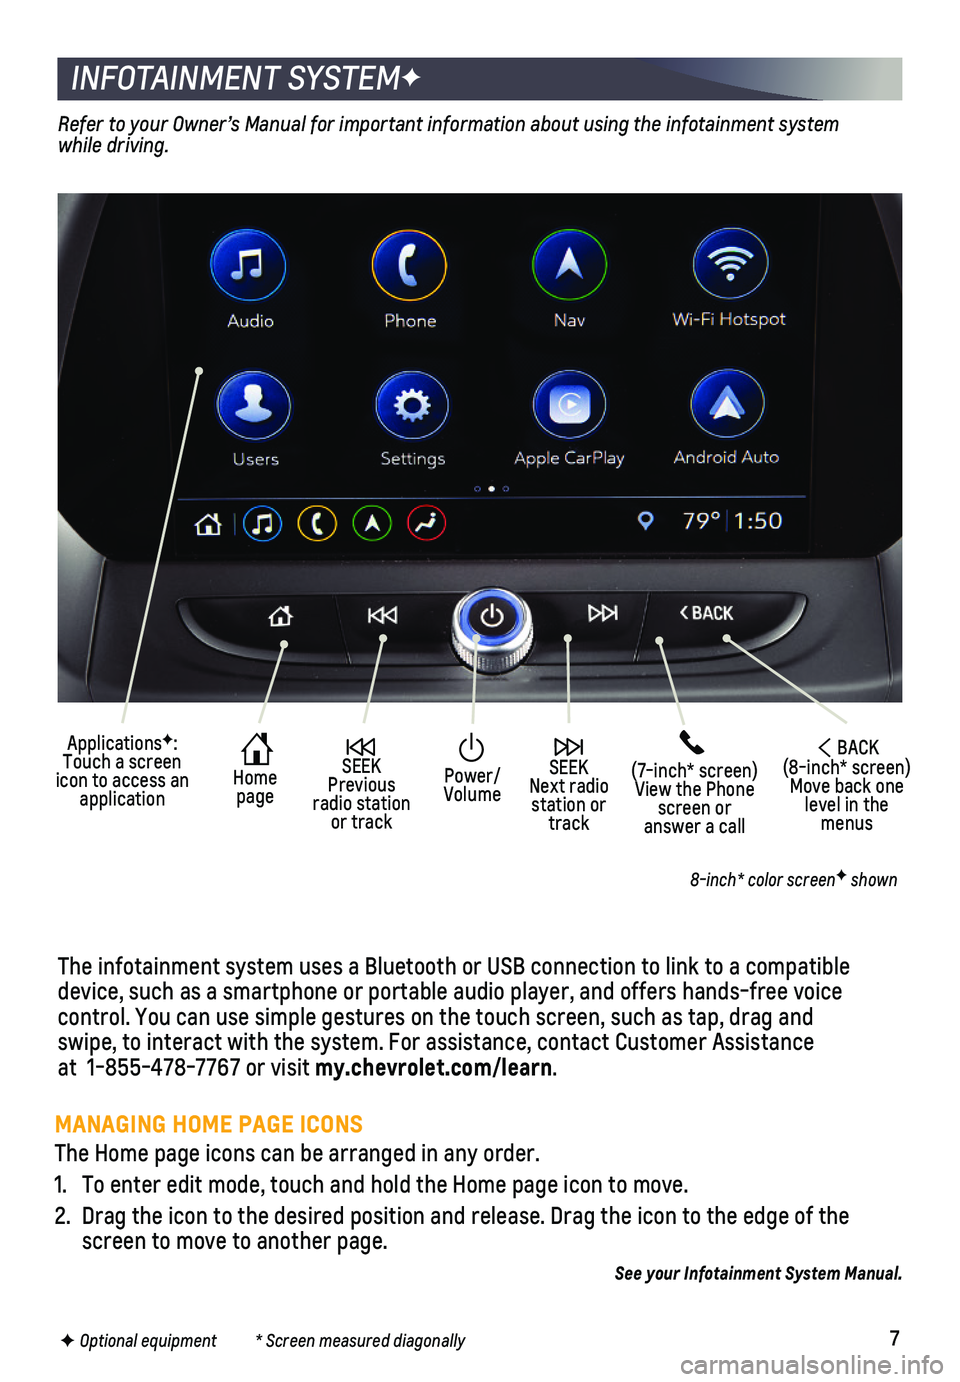 CHEVROLET CAMARO 2019  Get To Know Guide 7
INFOTAINMENT SYSTEMF
The infotainment system uses a Bluetooth or USB connection to link to a \
compatible device, such as a smartphone or portable audio player, and offers hands-\
free voice  
contr